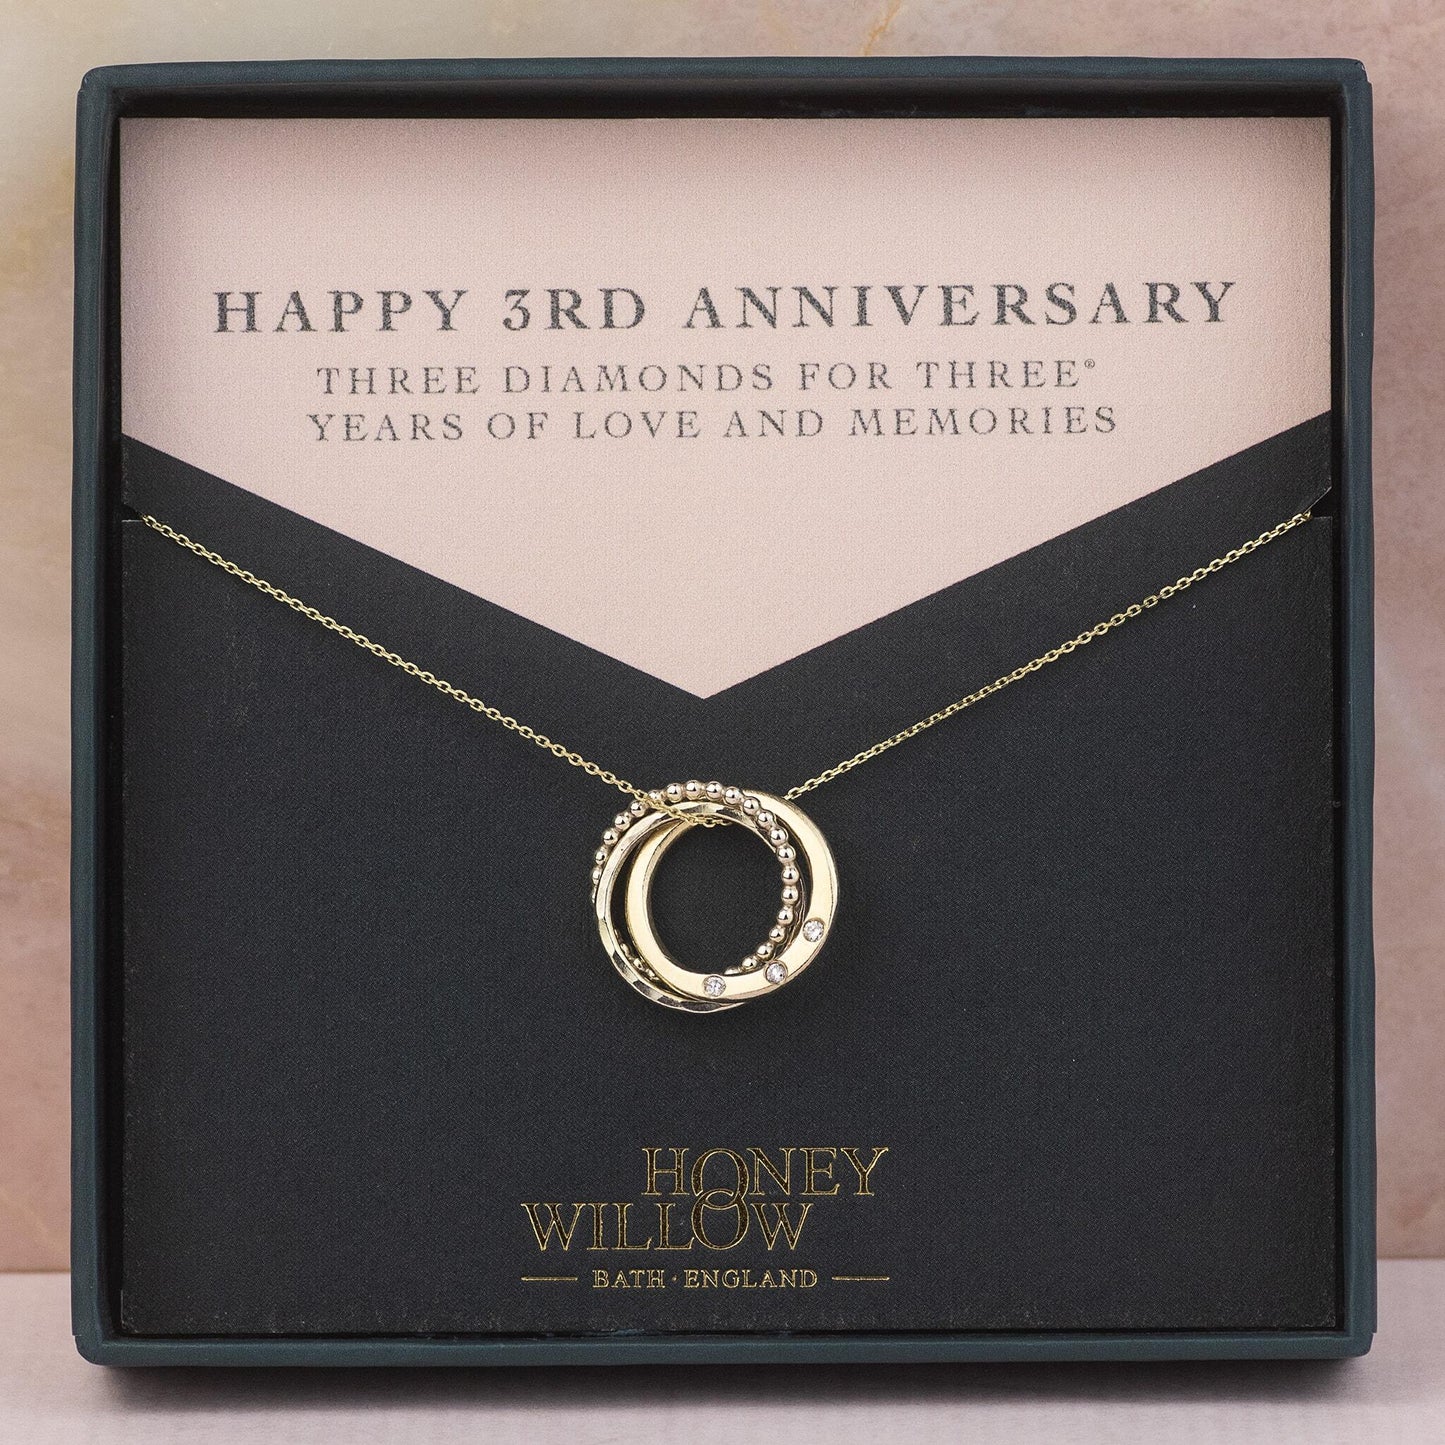 3rd Anniversary Necklace - 9kt Gold - 3 Diamonds for 3 Years